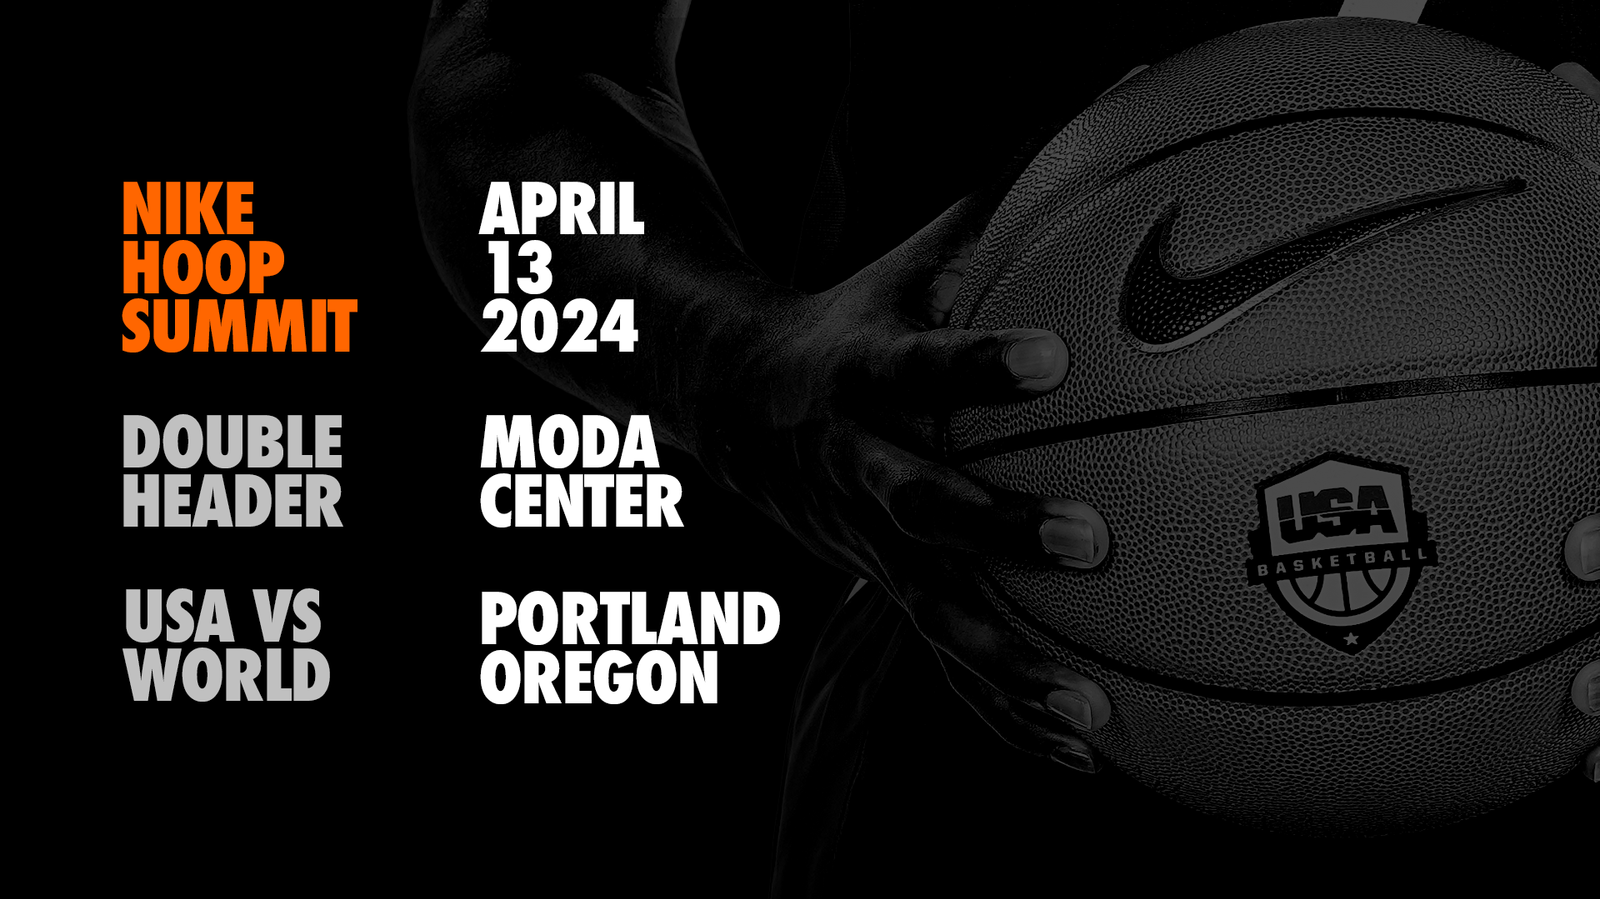 Nike Announces World Team Rosters For The Hoop Summit